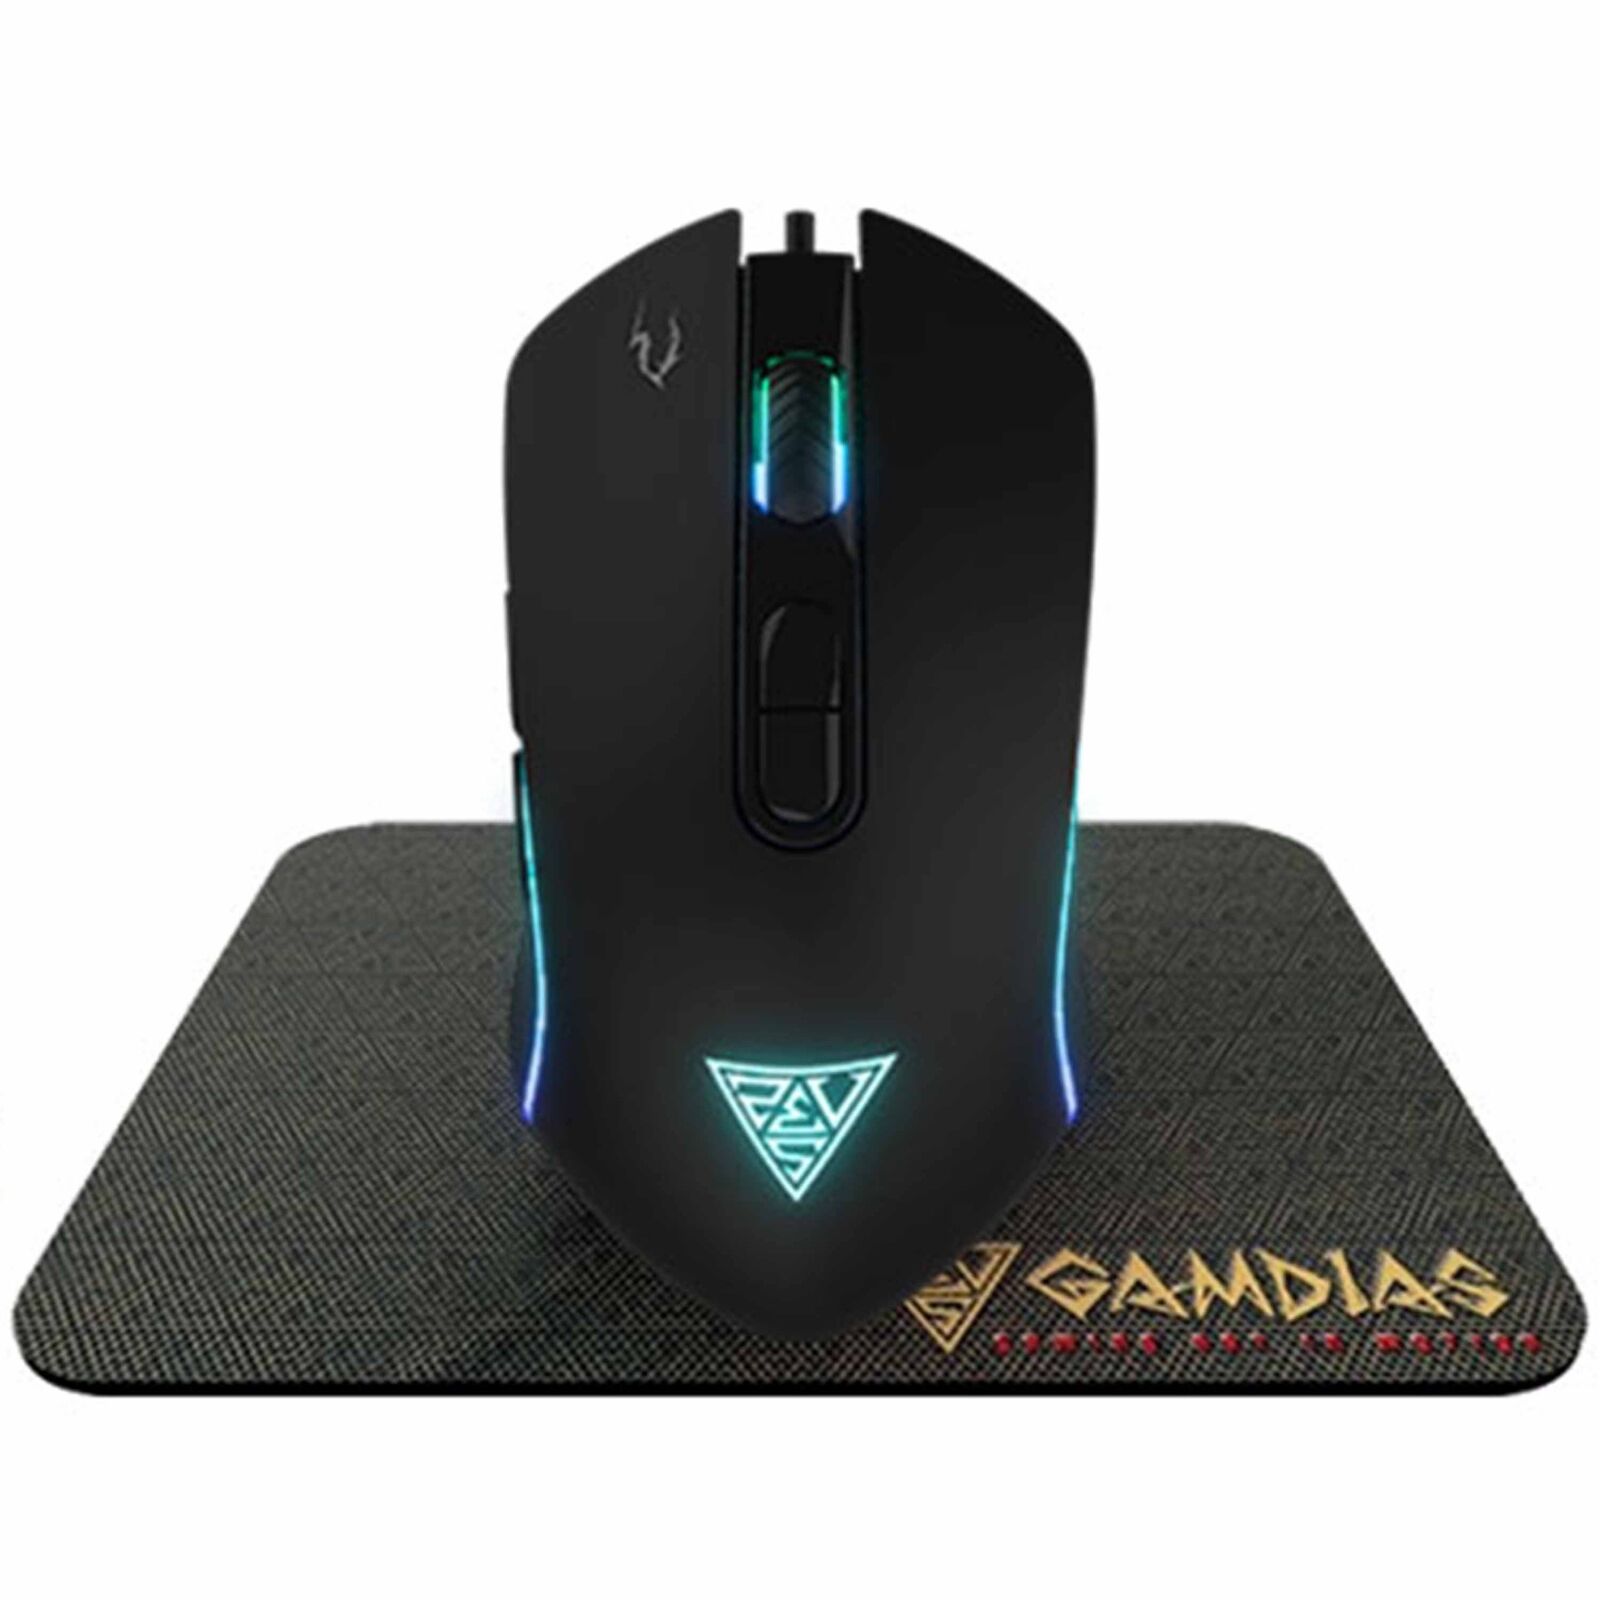 Mouse USB Gaming 3600DPI RGB With Pad Containing Game Mousepad Plug and Play PC